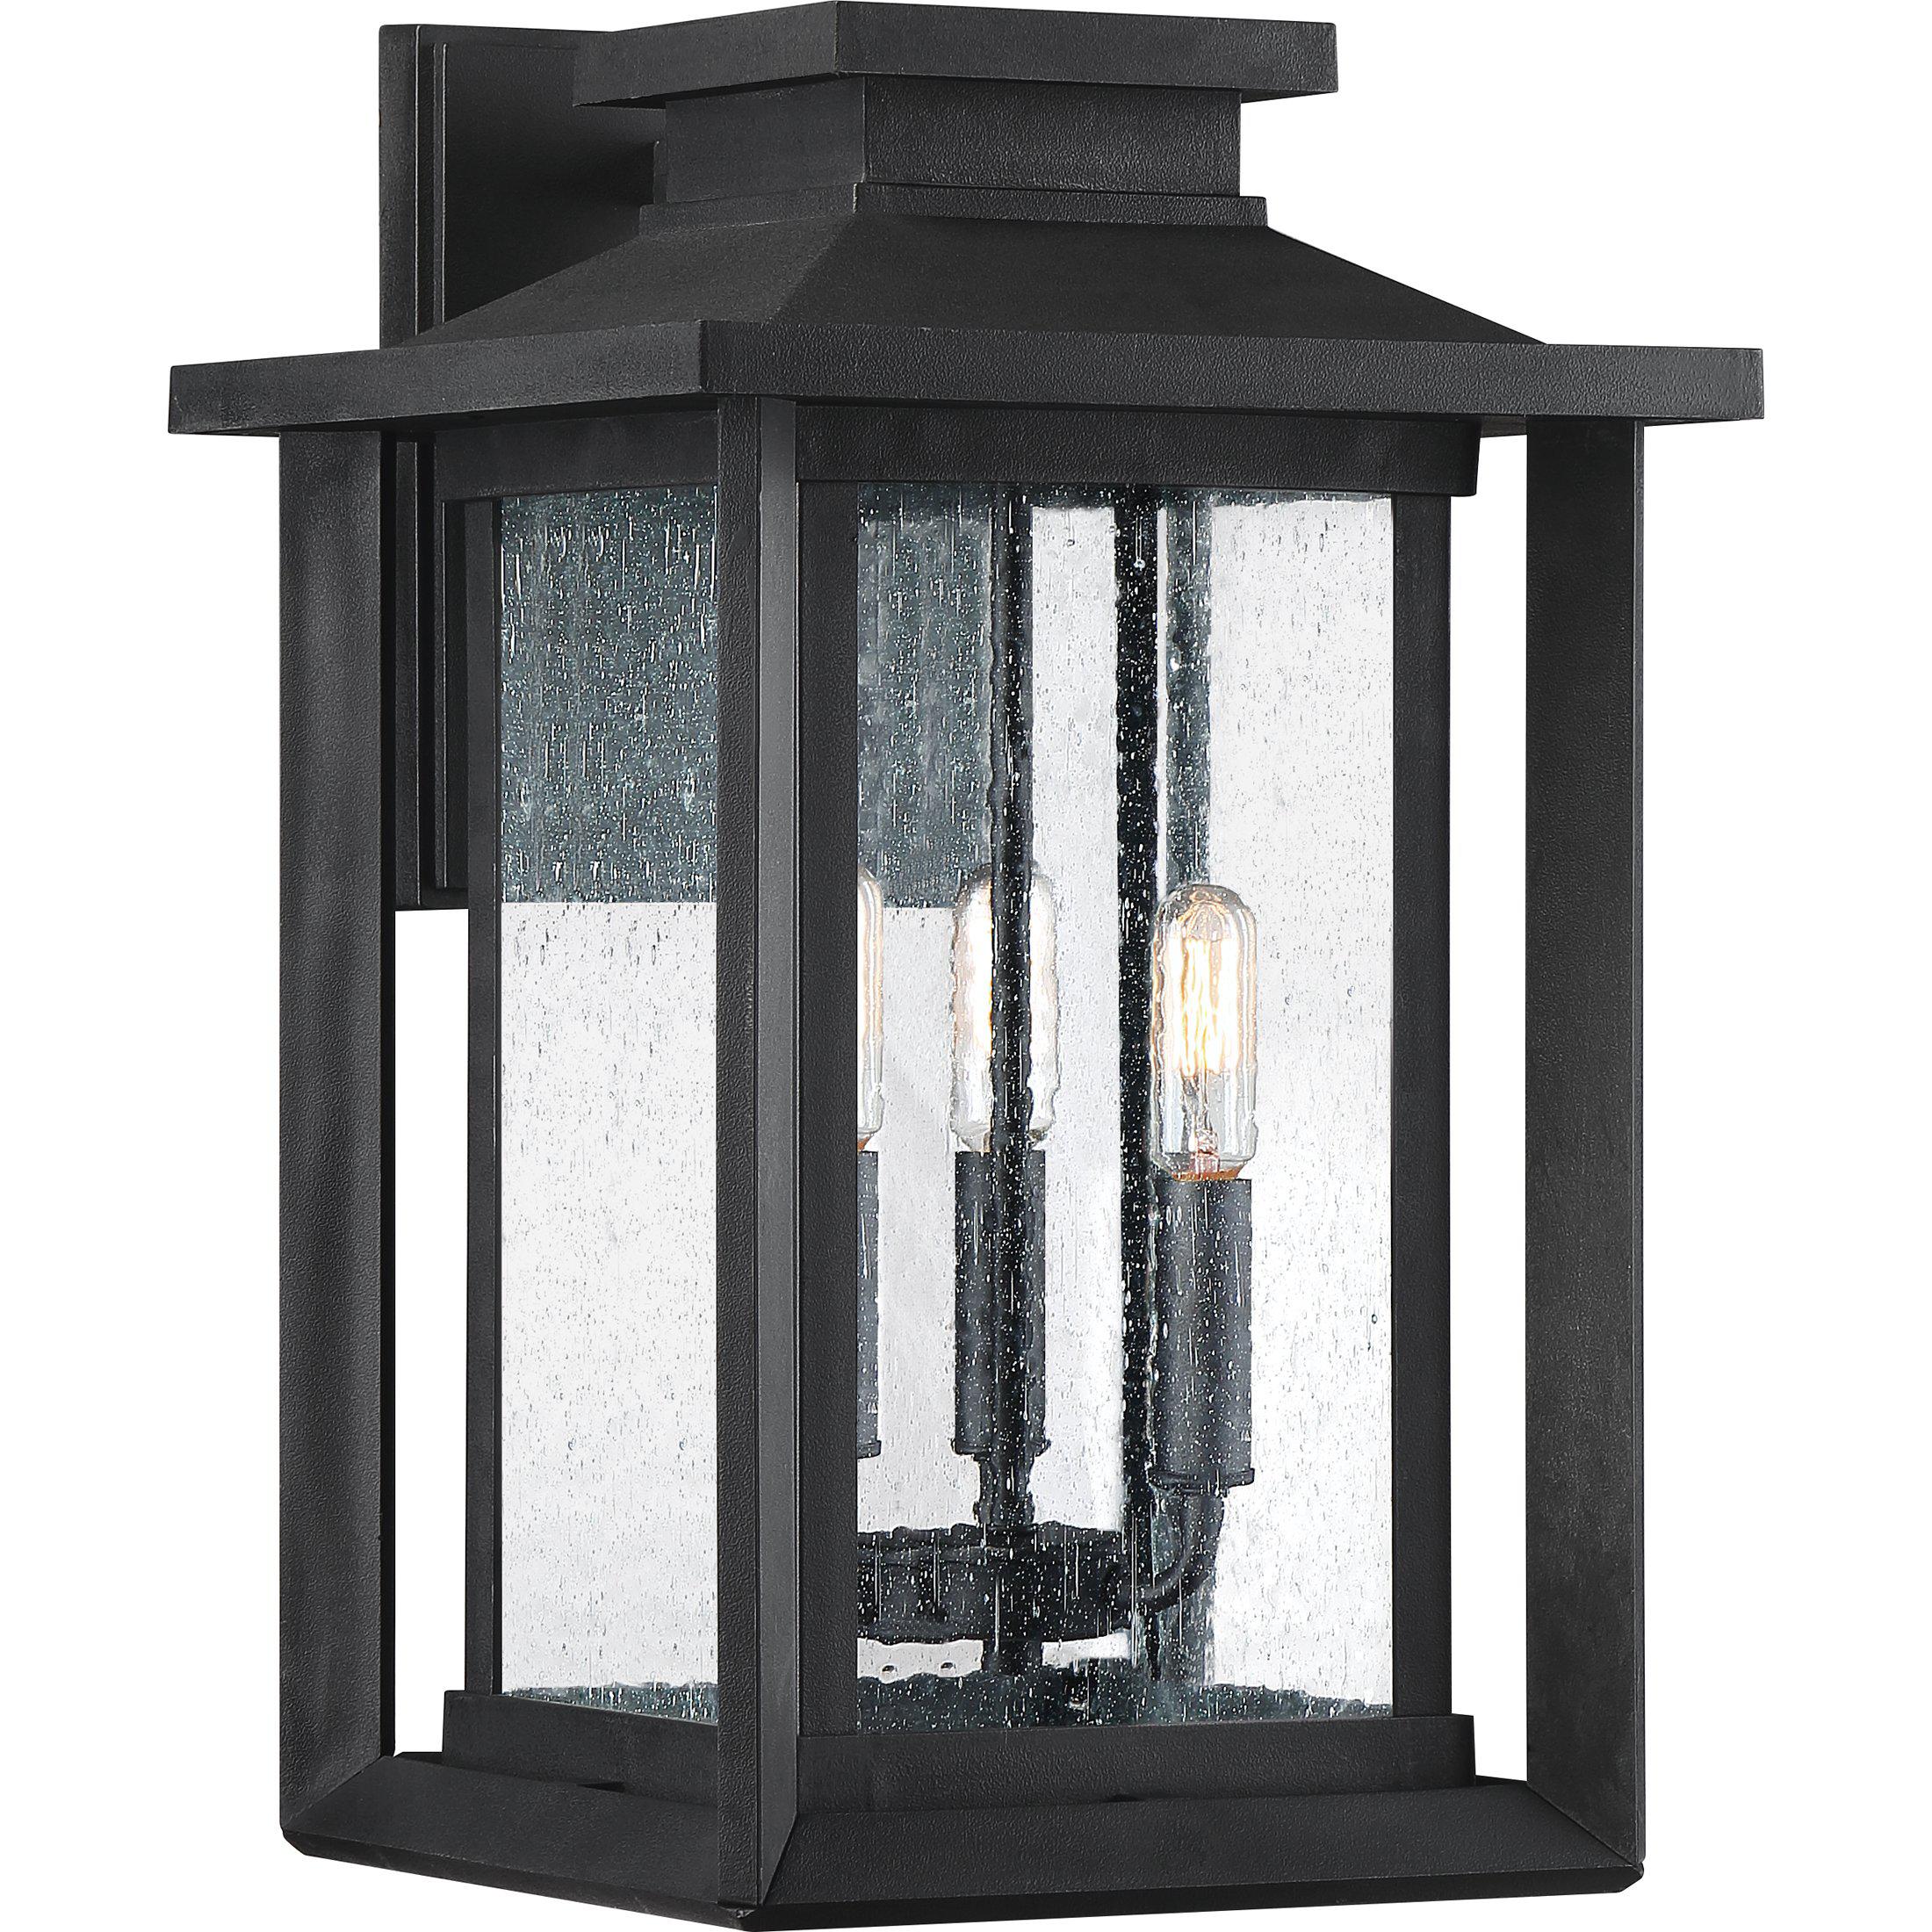 Quoizel  Wakefield Outdoor Lantern, Large Outdoor Light Fixture Quoizel Earth Black  